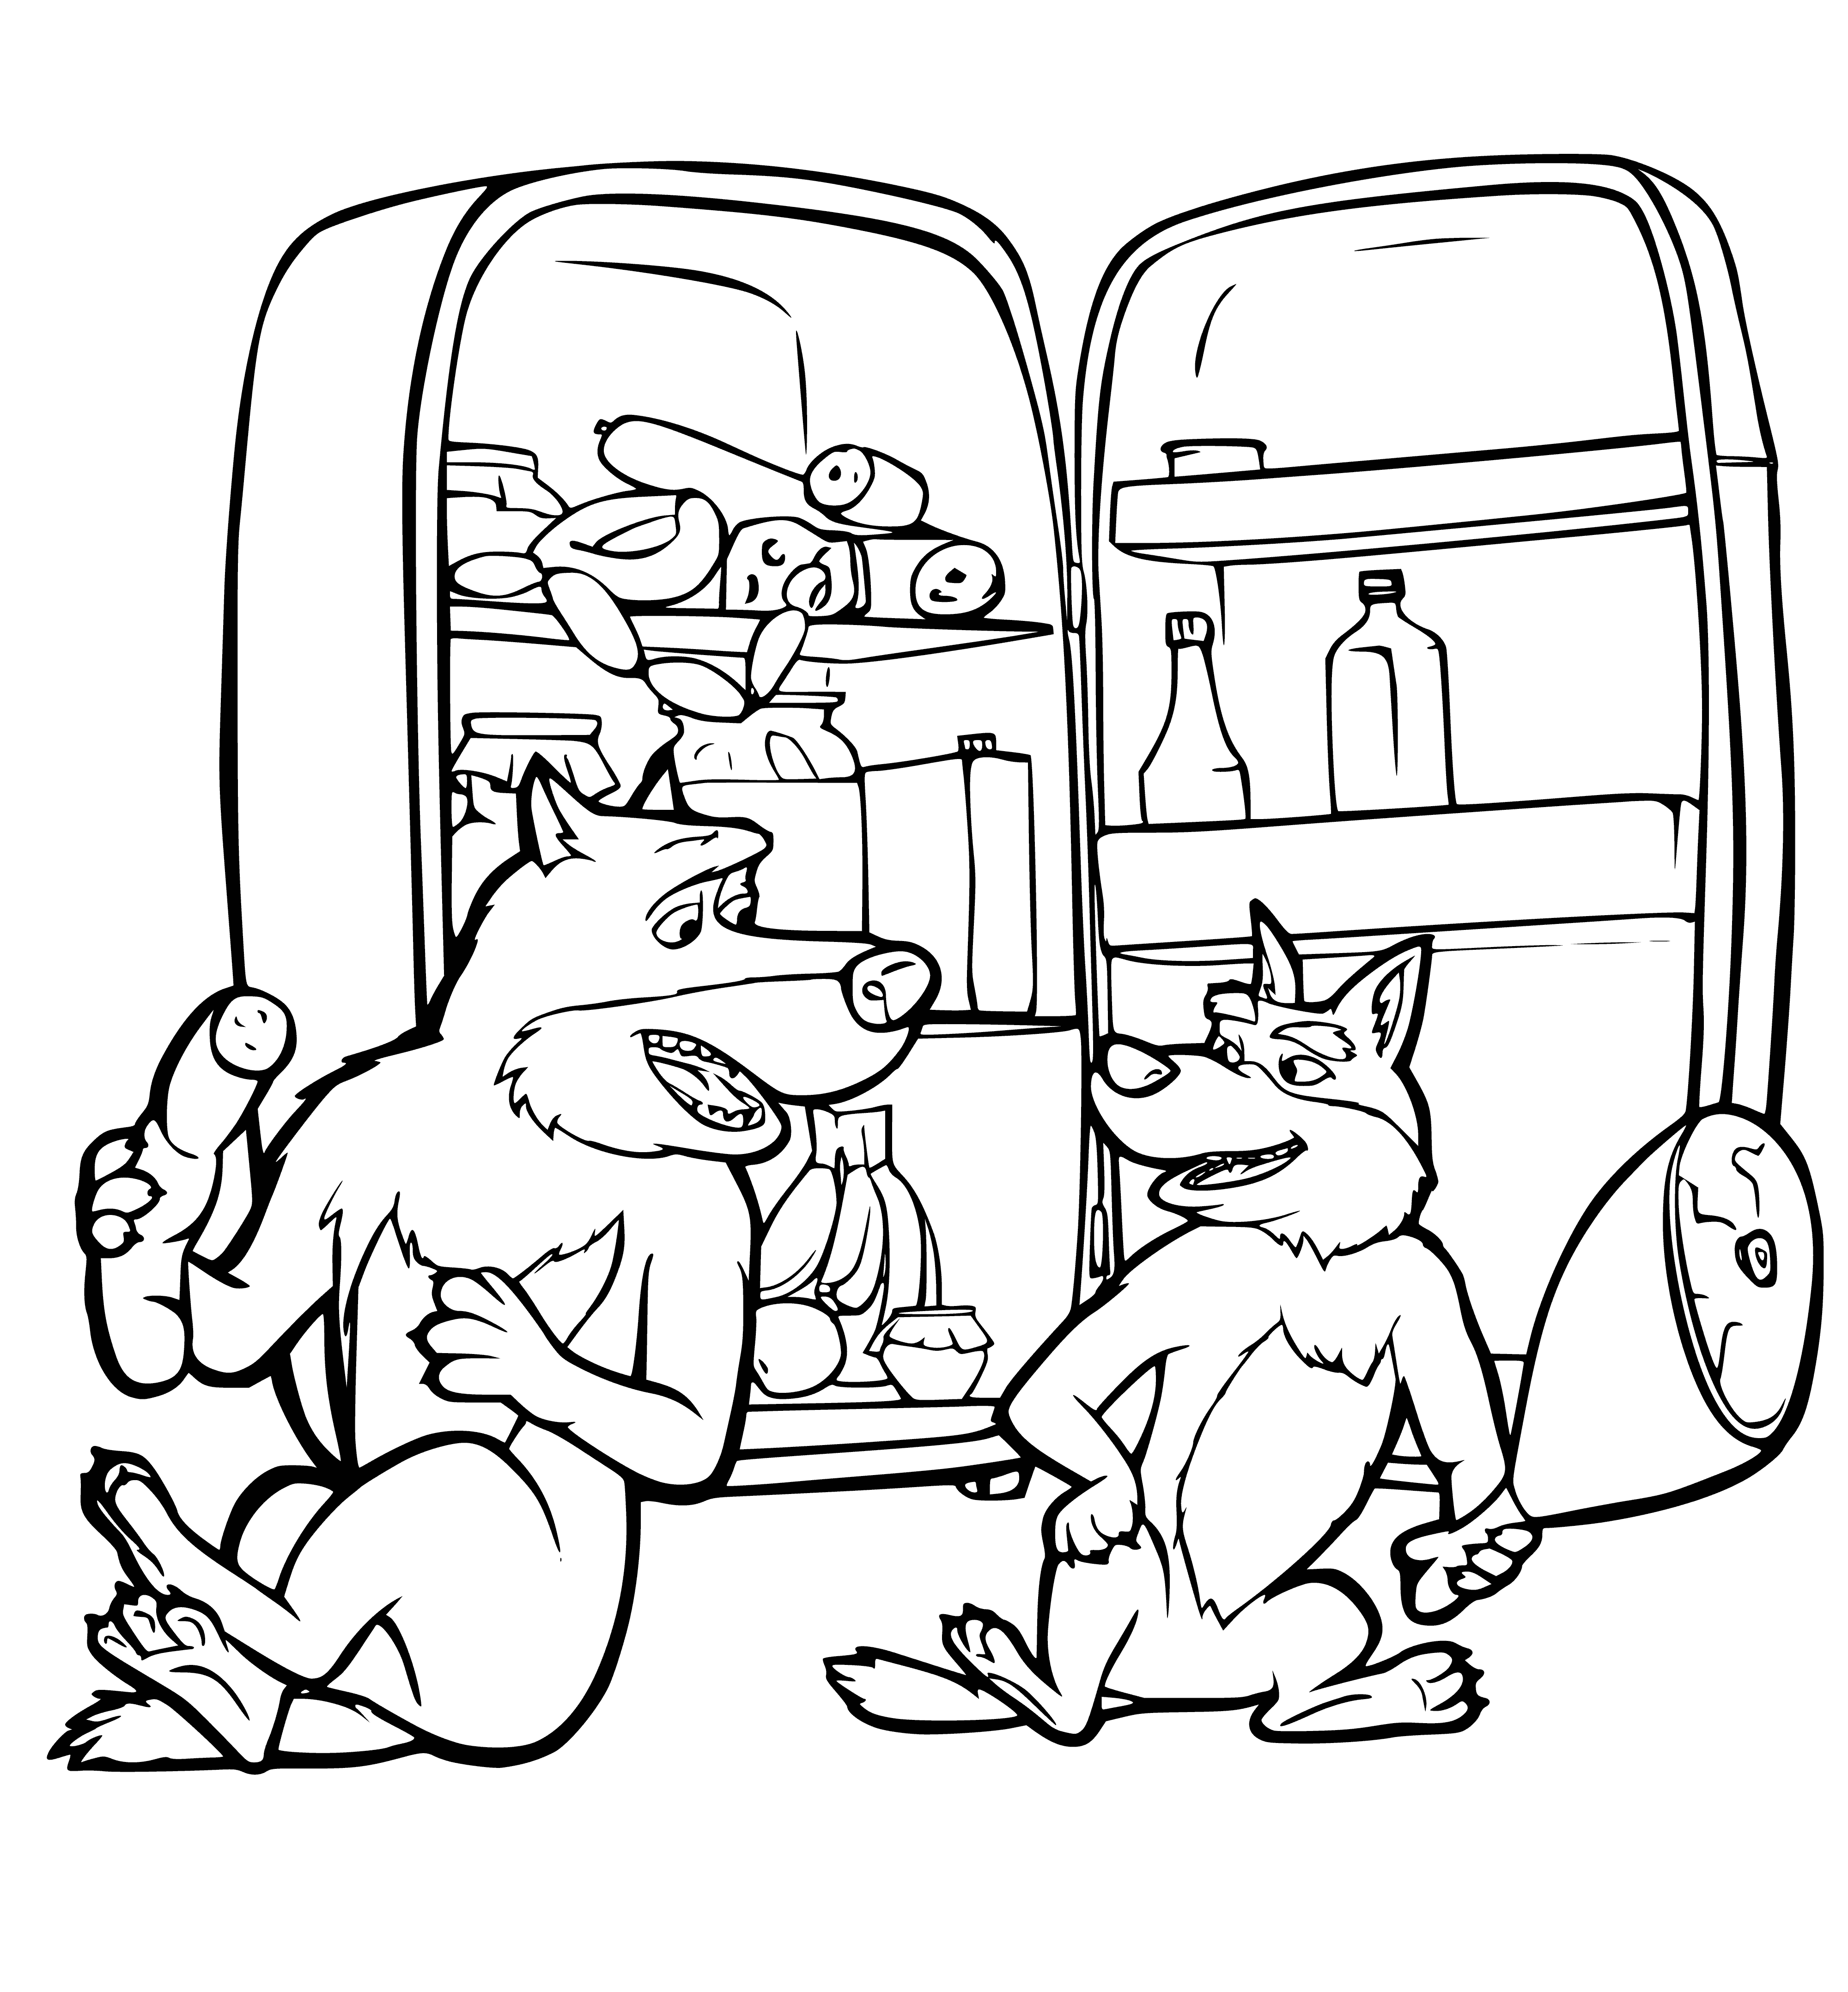 coloring page: Masha and Bear escape wolves by tree-climbing and rope-pulling.